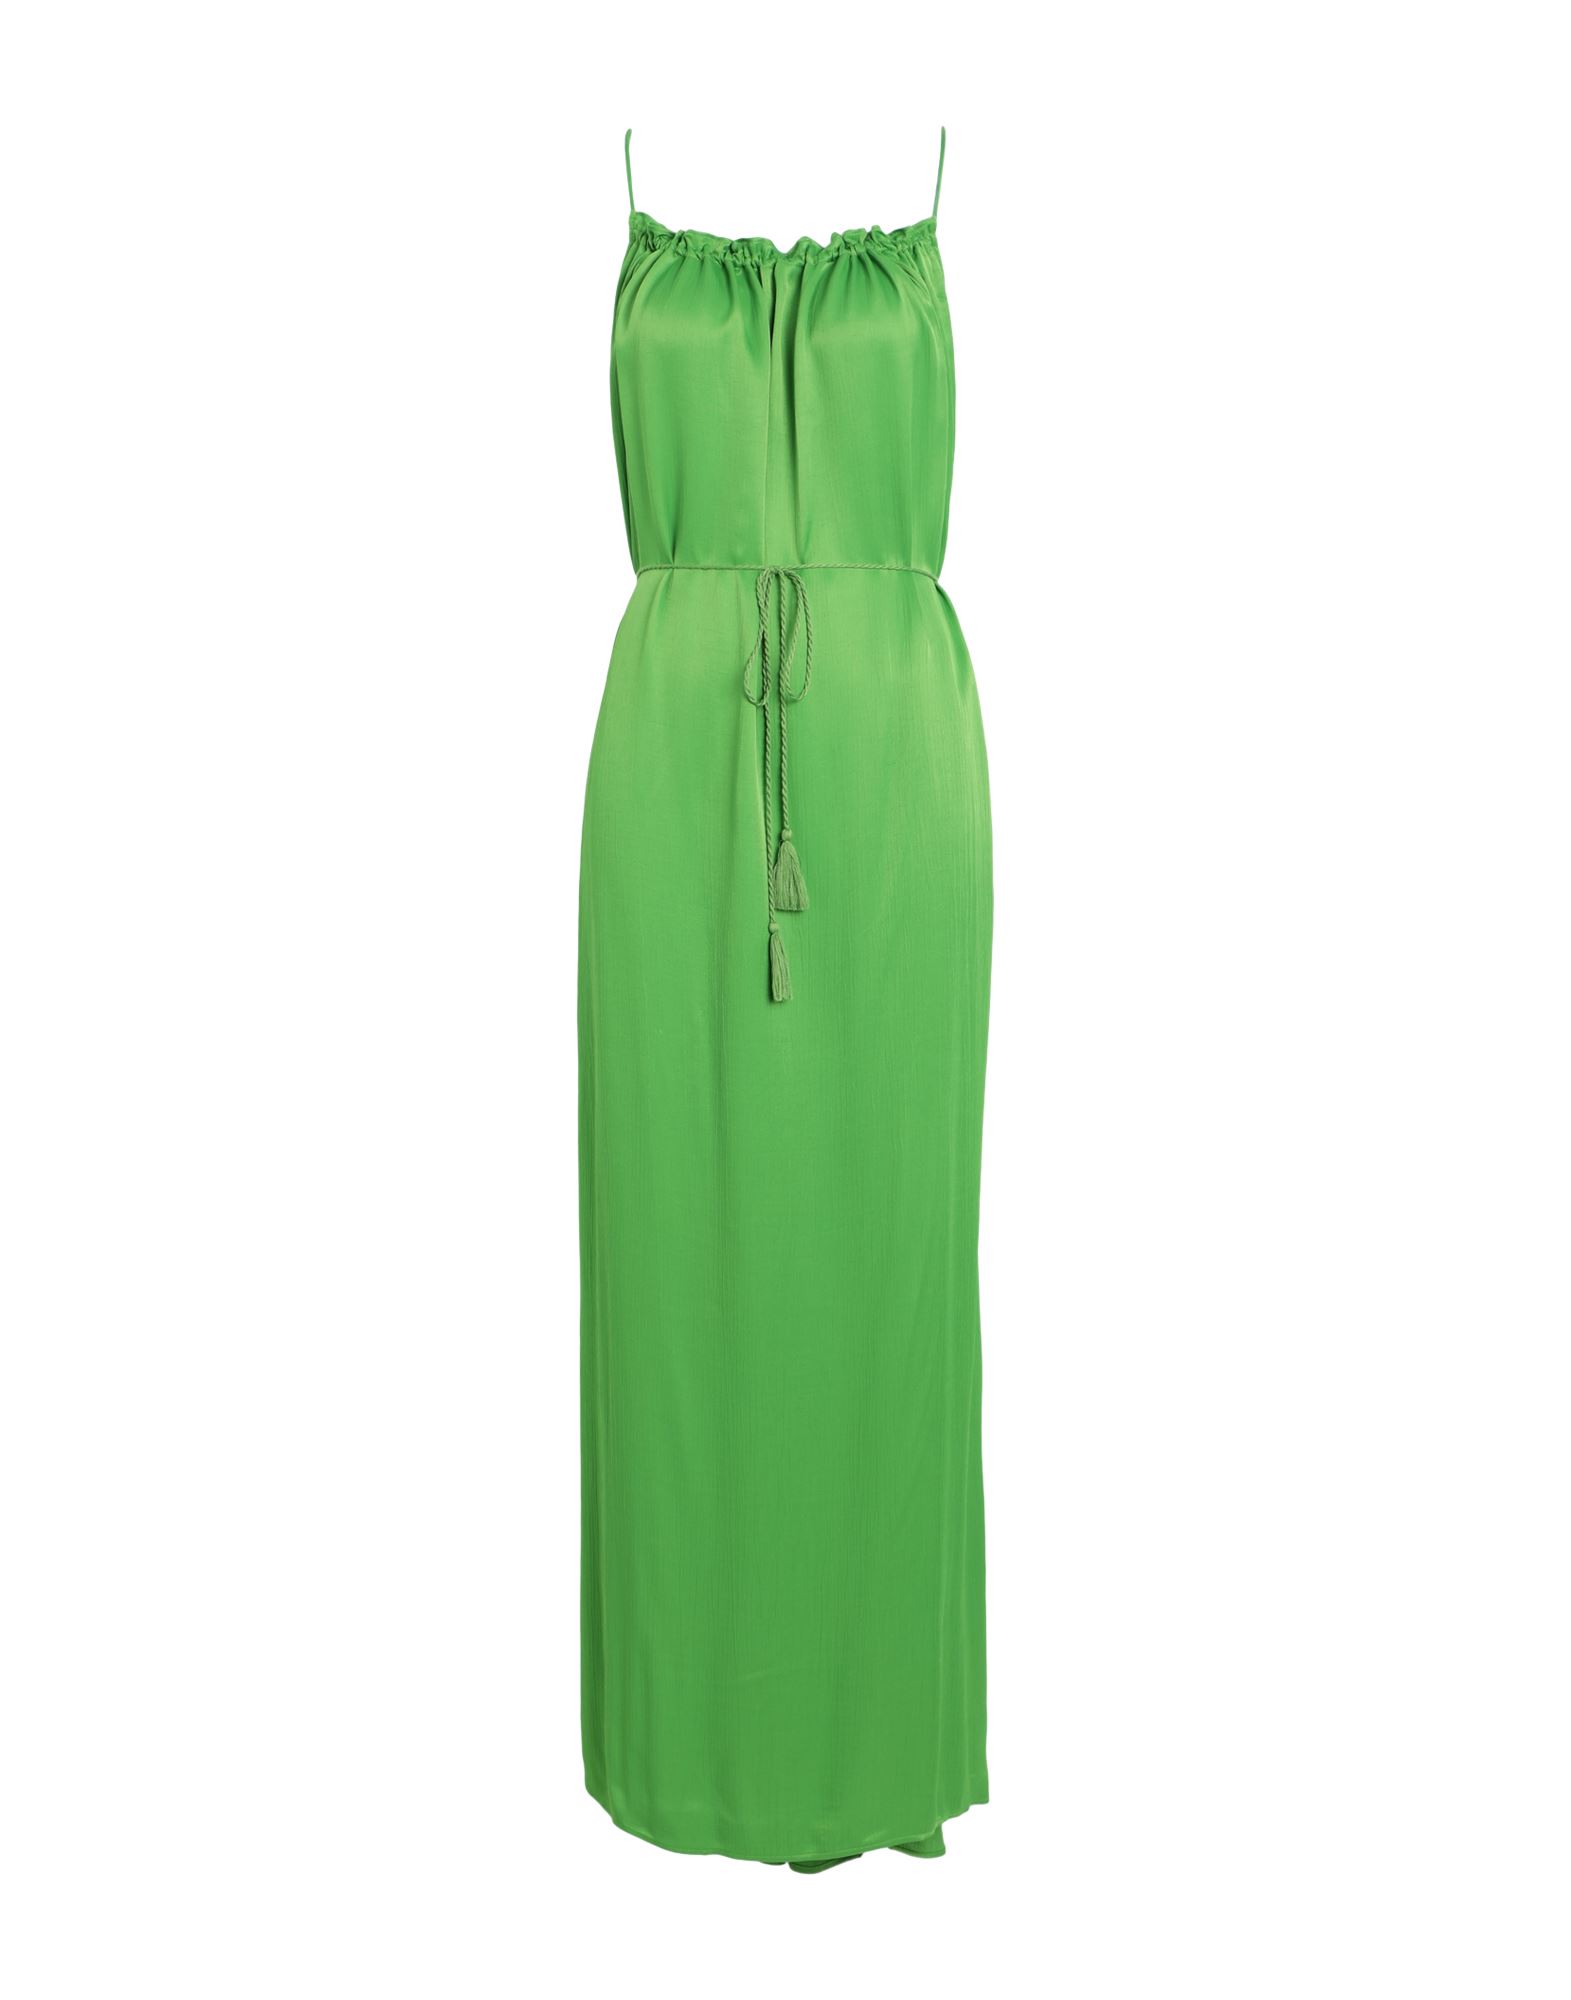 OTHER STORIES & OTHER STORIES WOMAN LONG DRESS GREEN SIZE 10 VISCOSE